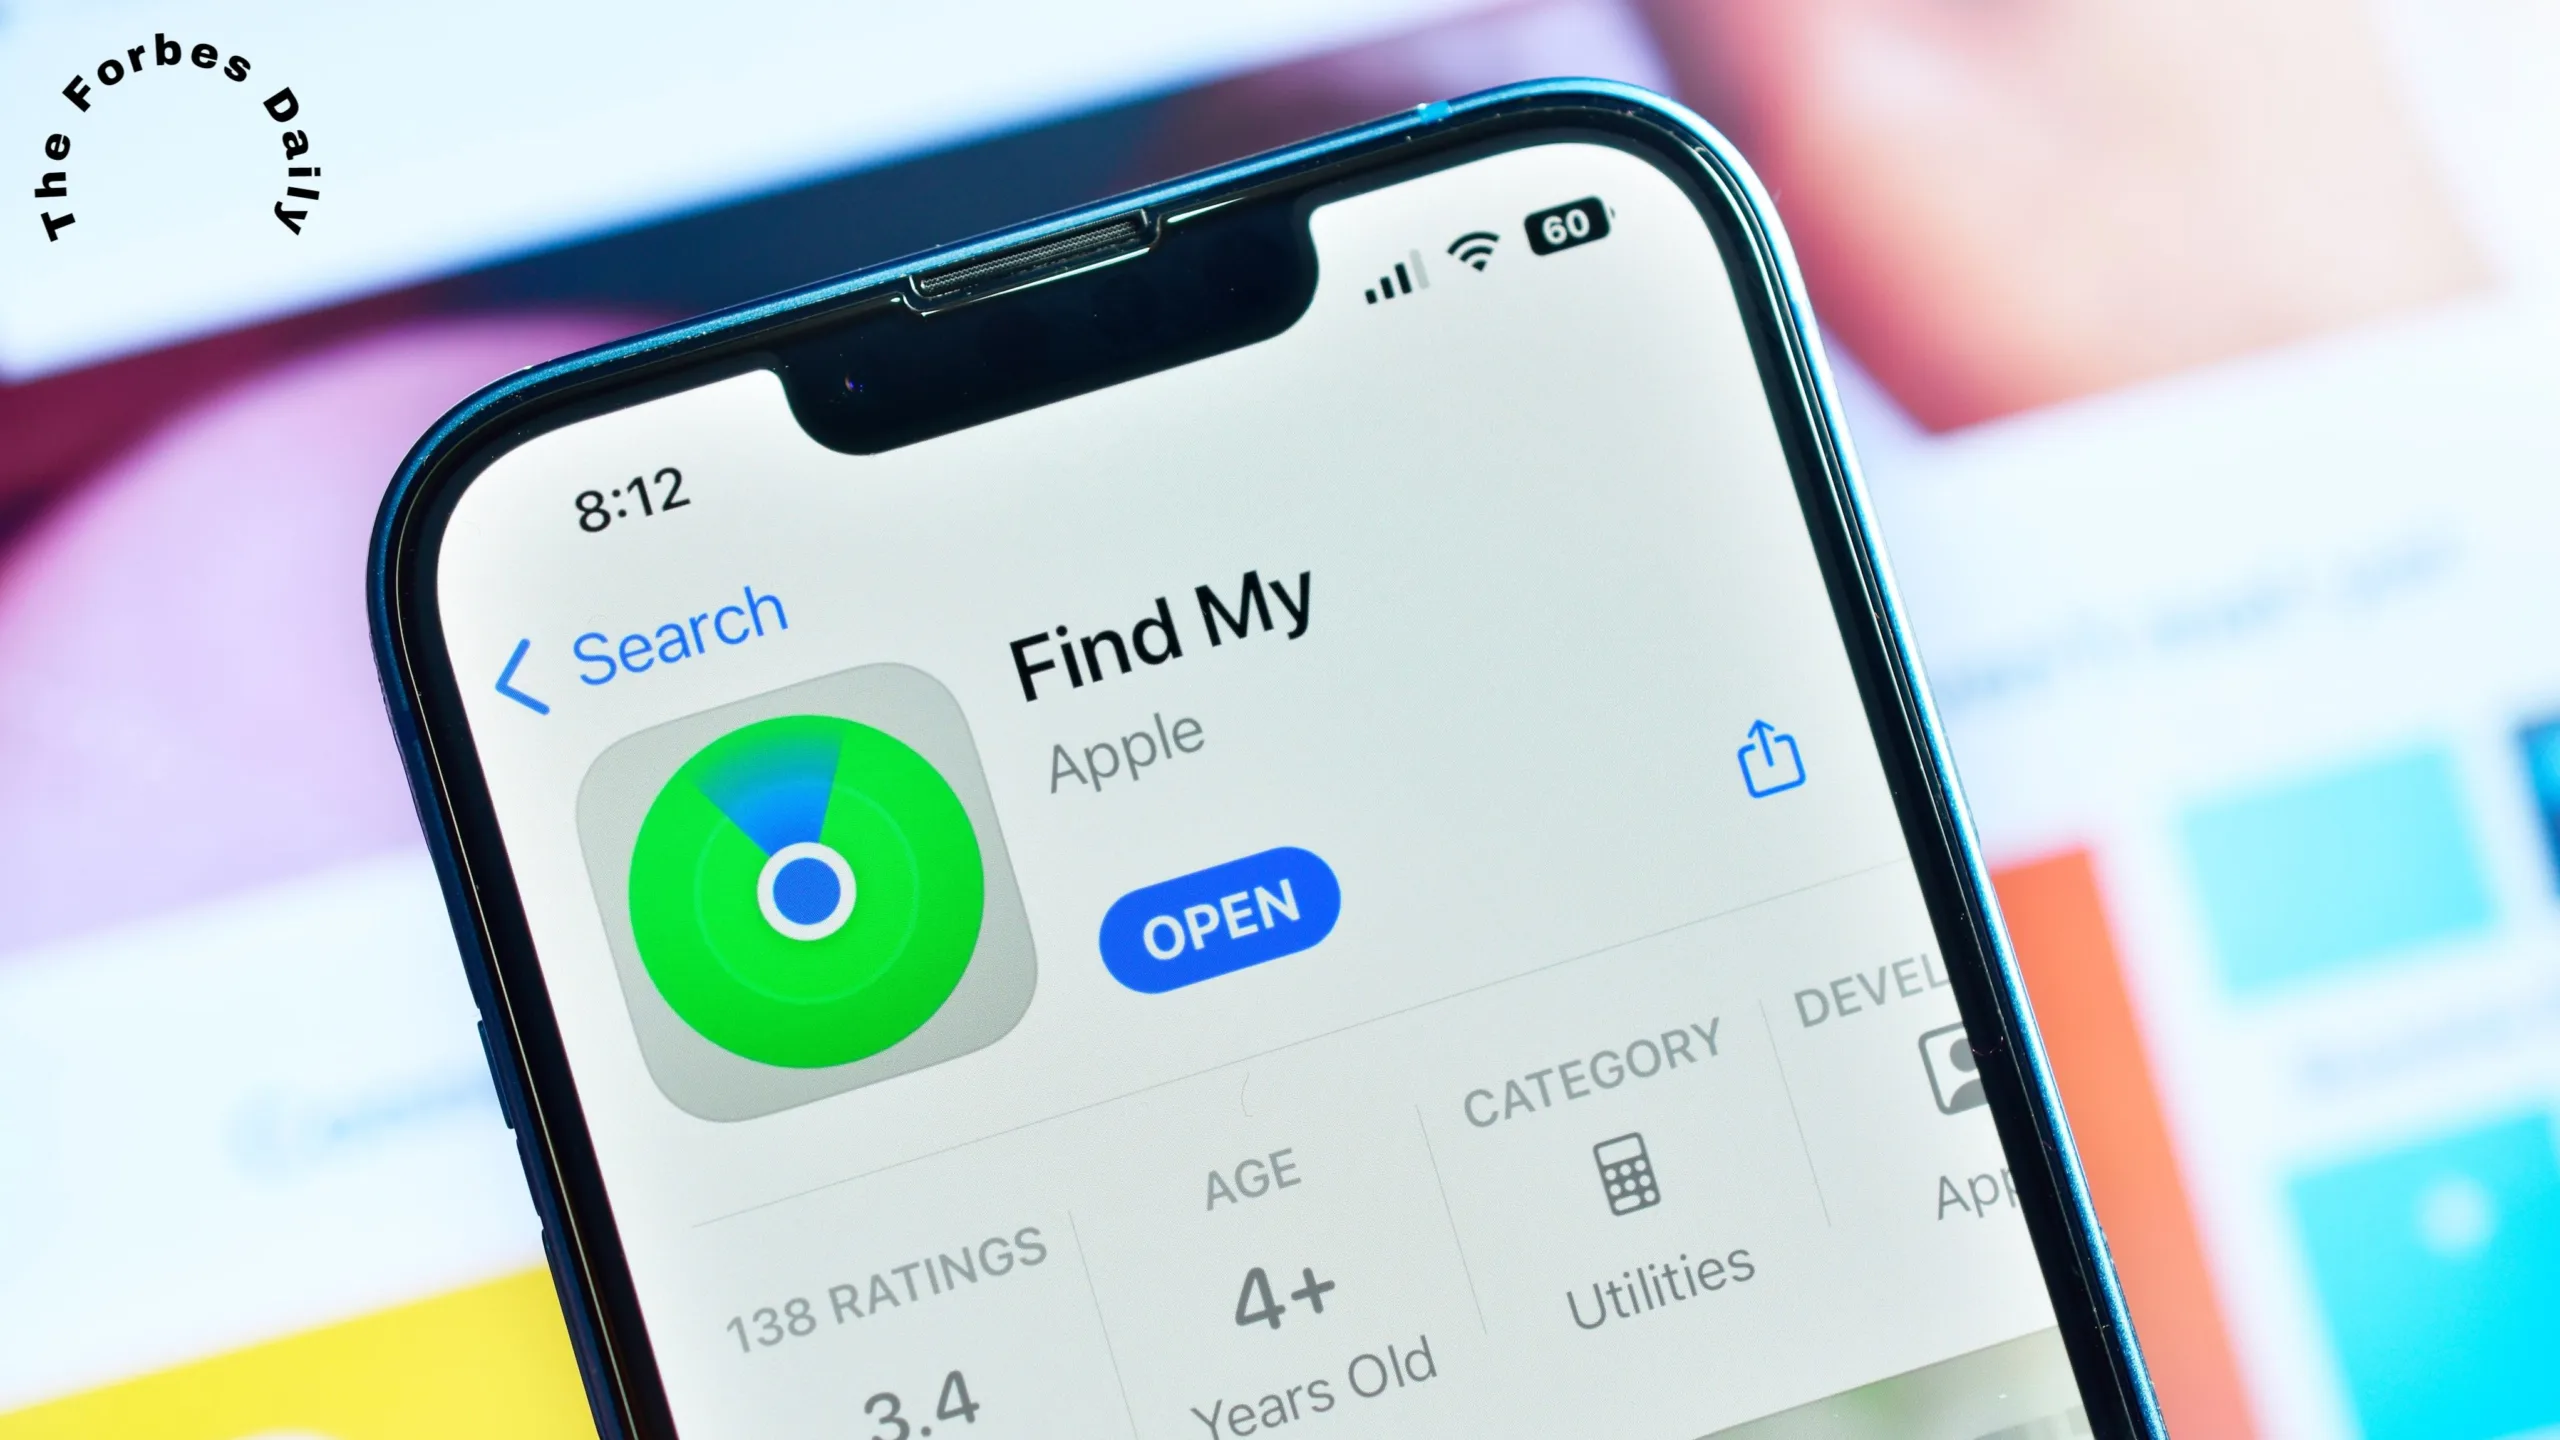 Effortless Security Locating Your iPhone with iCloud’s Find My iPhone The Forbes Daily